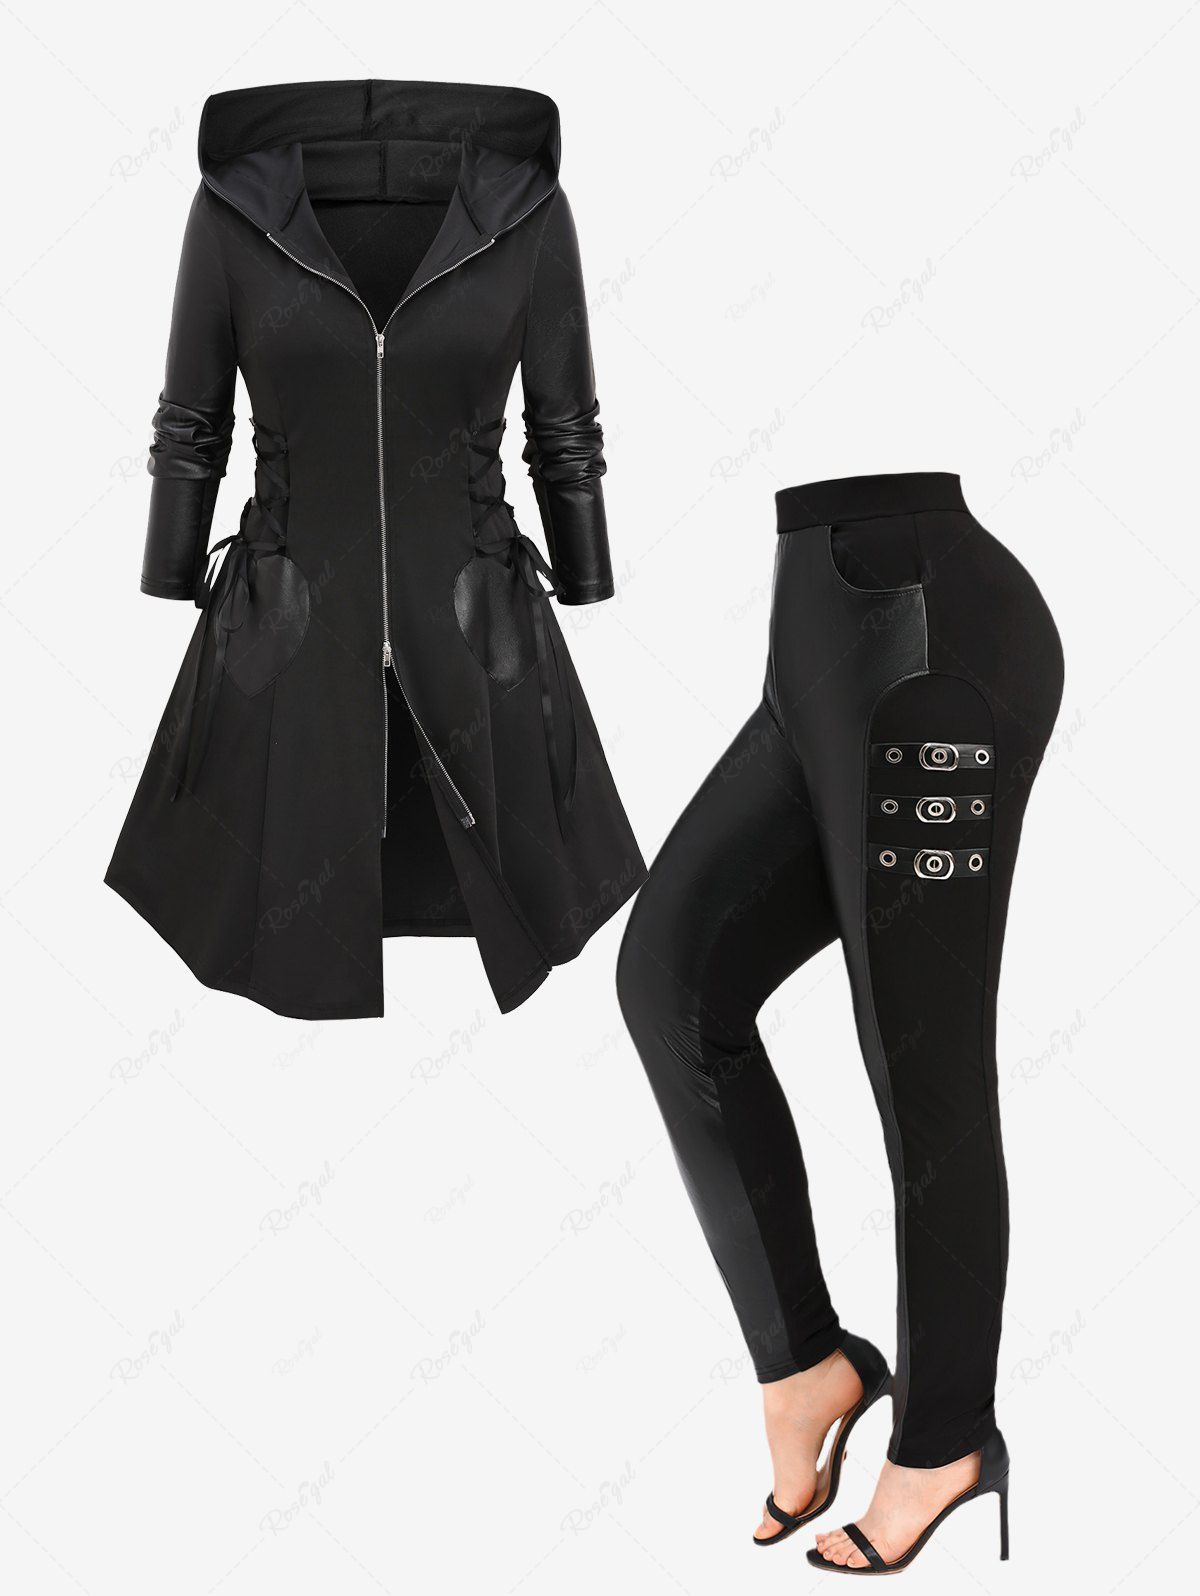 Trendy Lace Up PU Leather Patchwork Zipper Hooded Coat and PU Leather Patchwork Buckles Grommets Pockets Pants Plus Size Outfit  